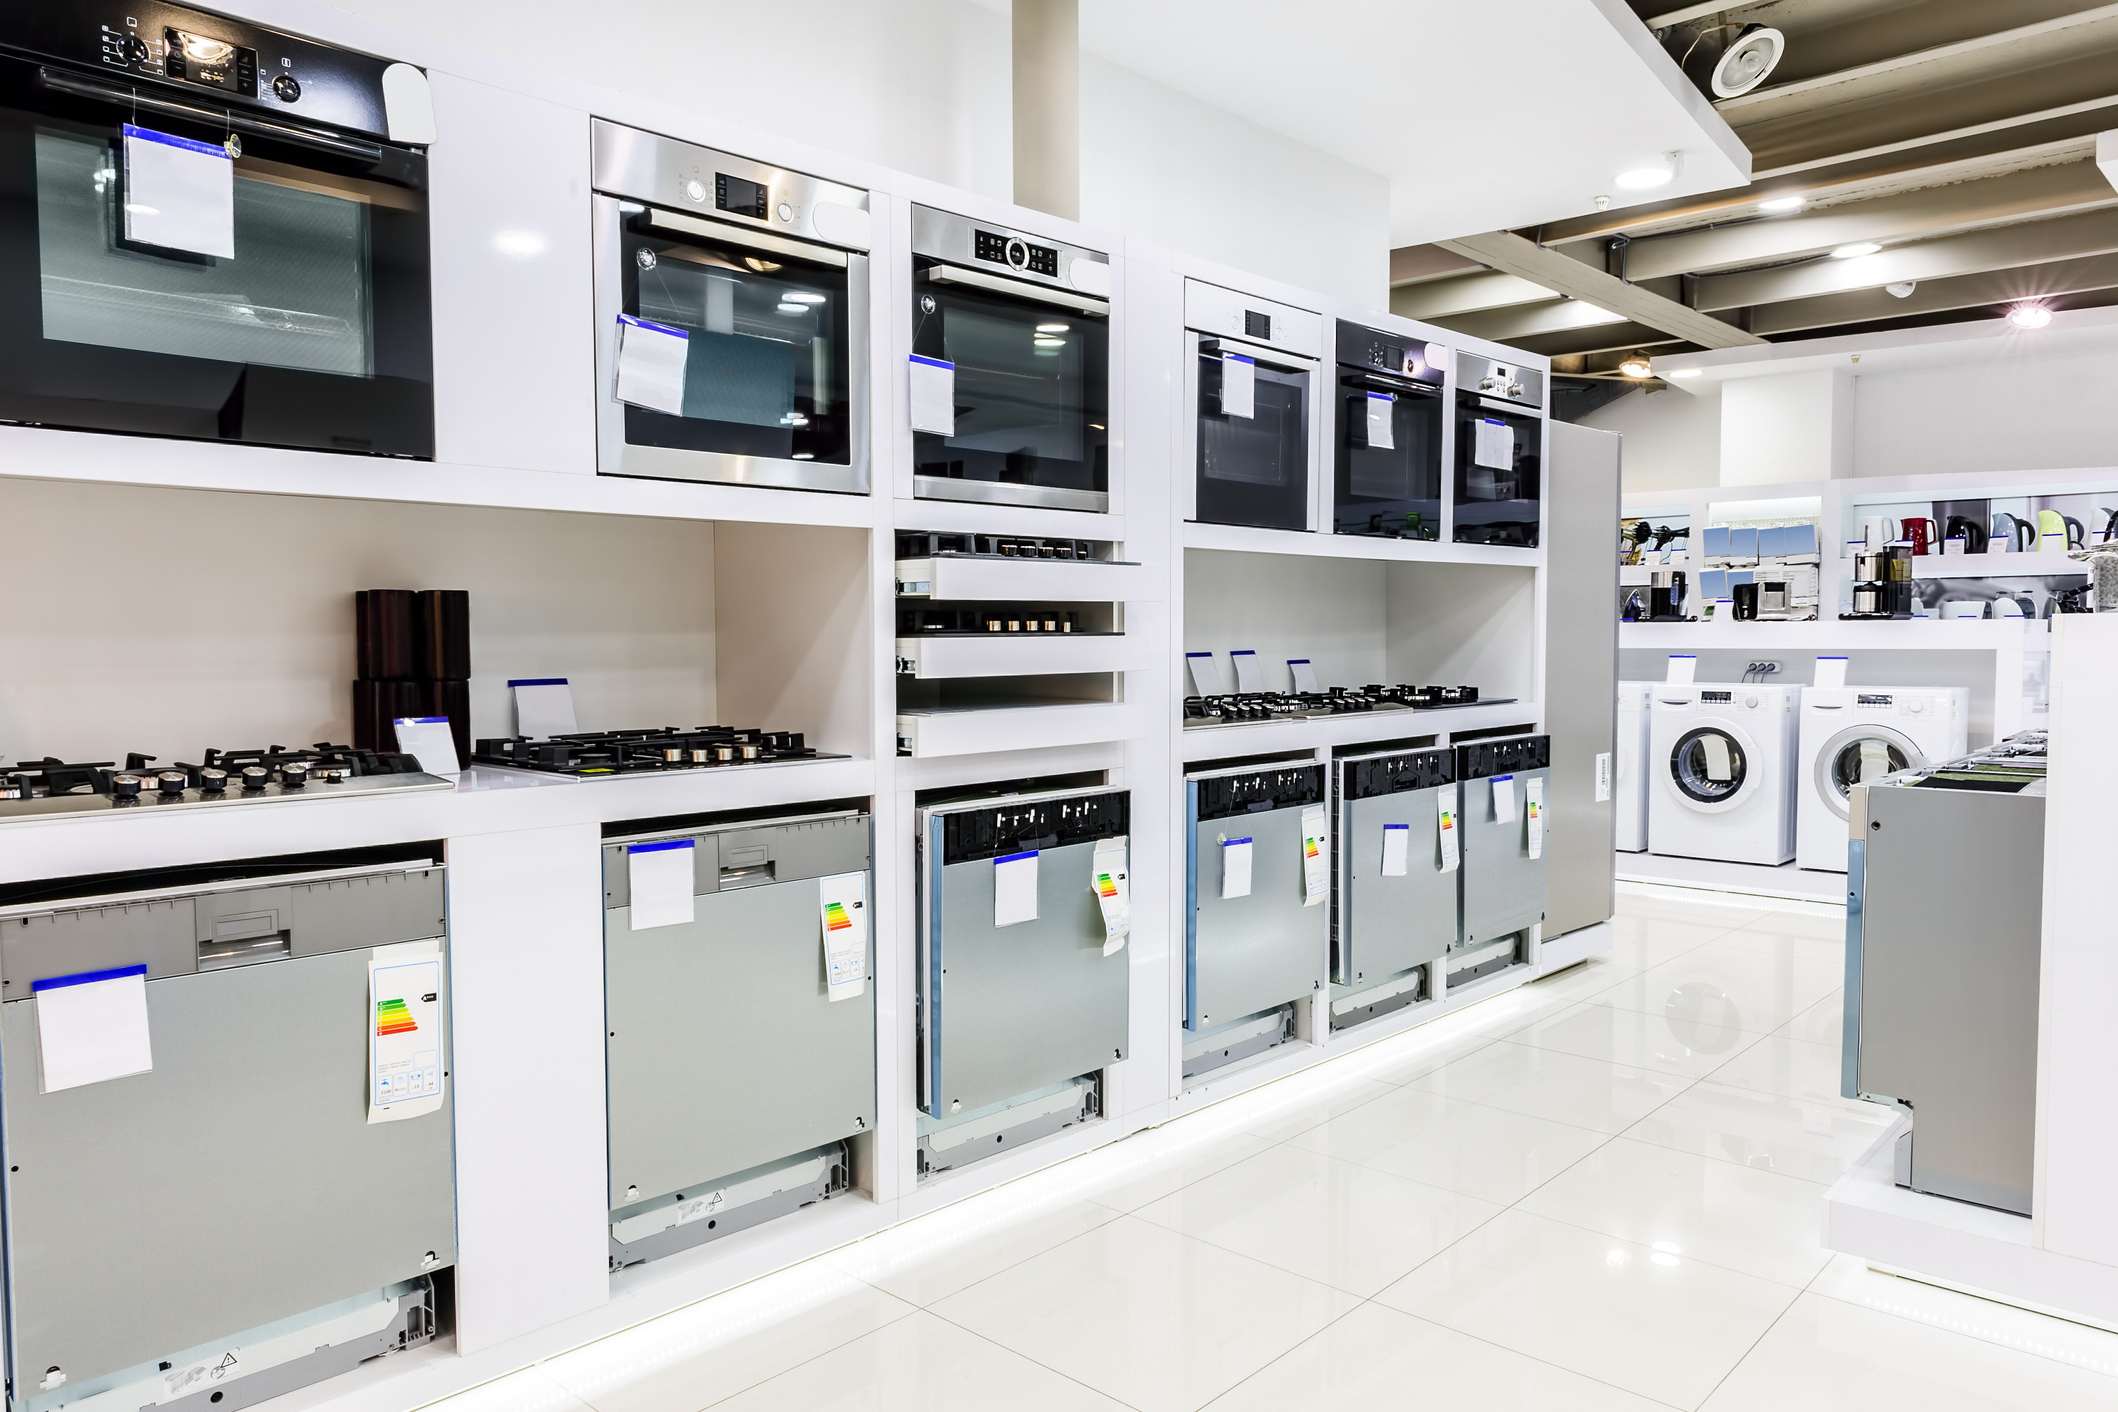 Home Appliances Merger Could Reduce